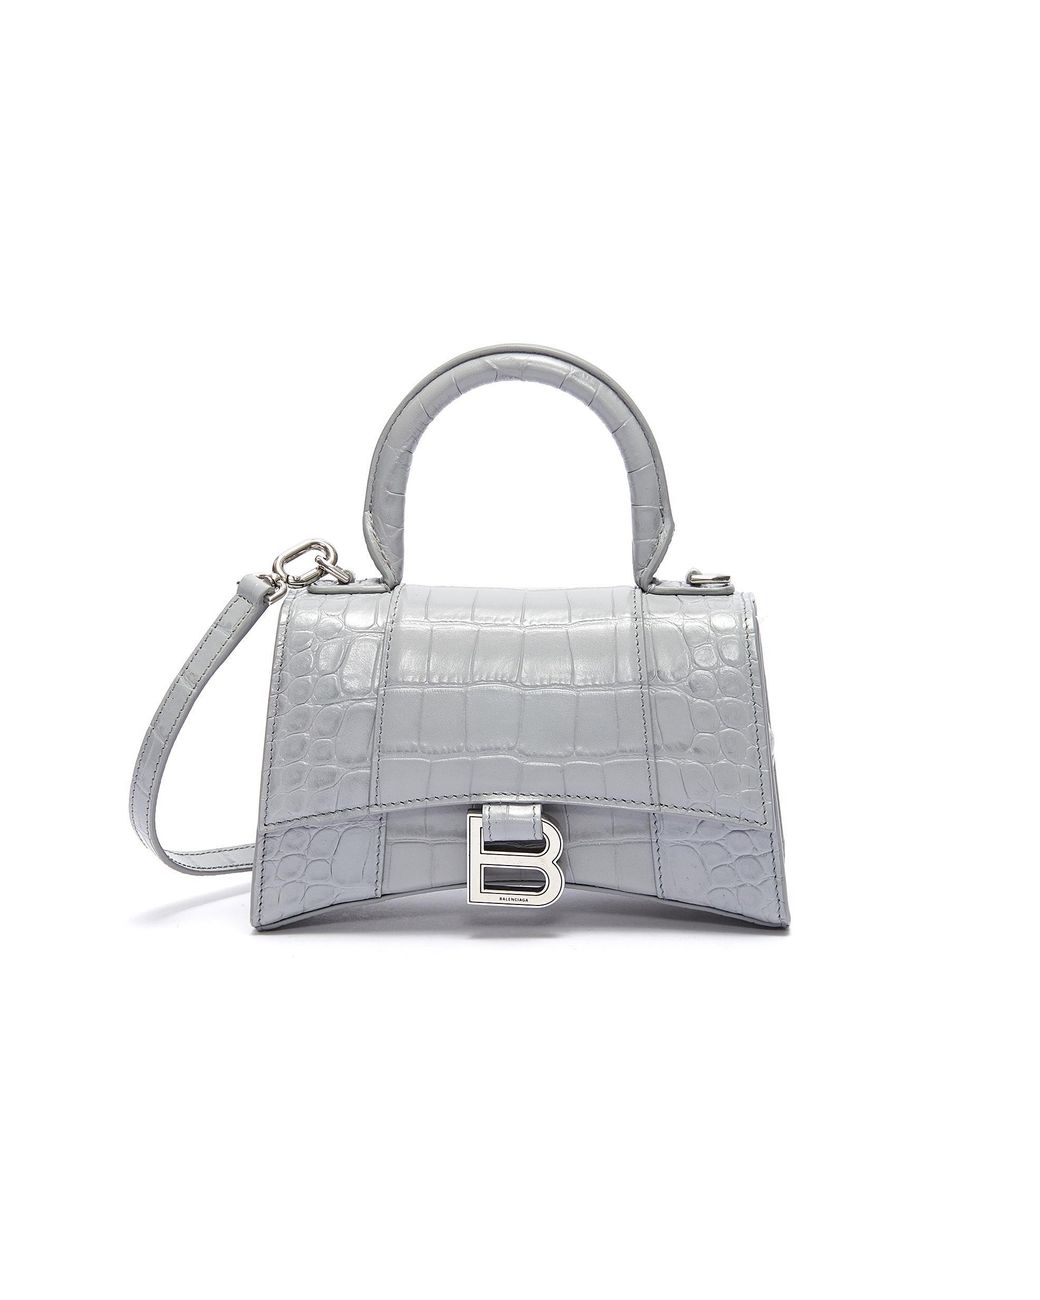 Balenciaga 'hourglass' Xs Top Handle Croc Embossed Leather Bag in Grey  Croc-Embossed (Gray) | Lyst